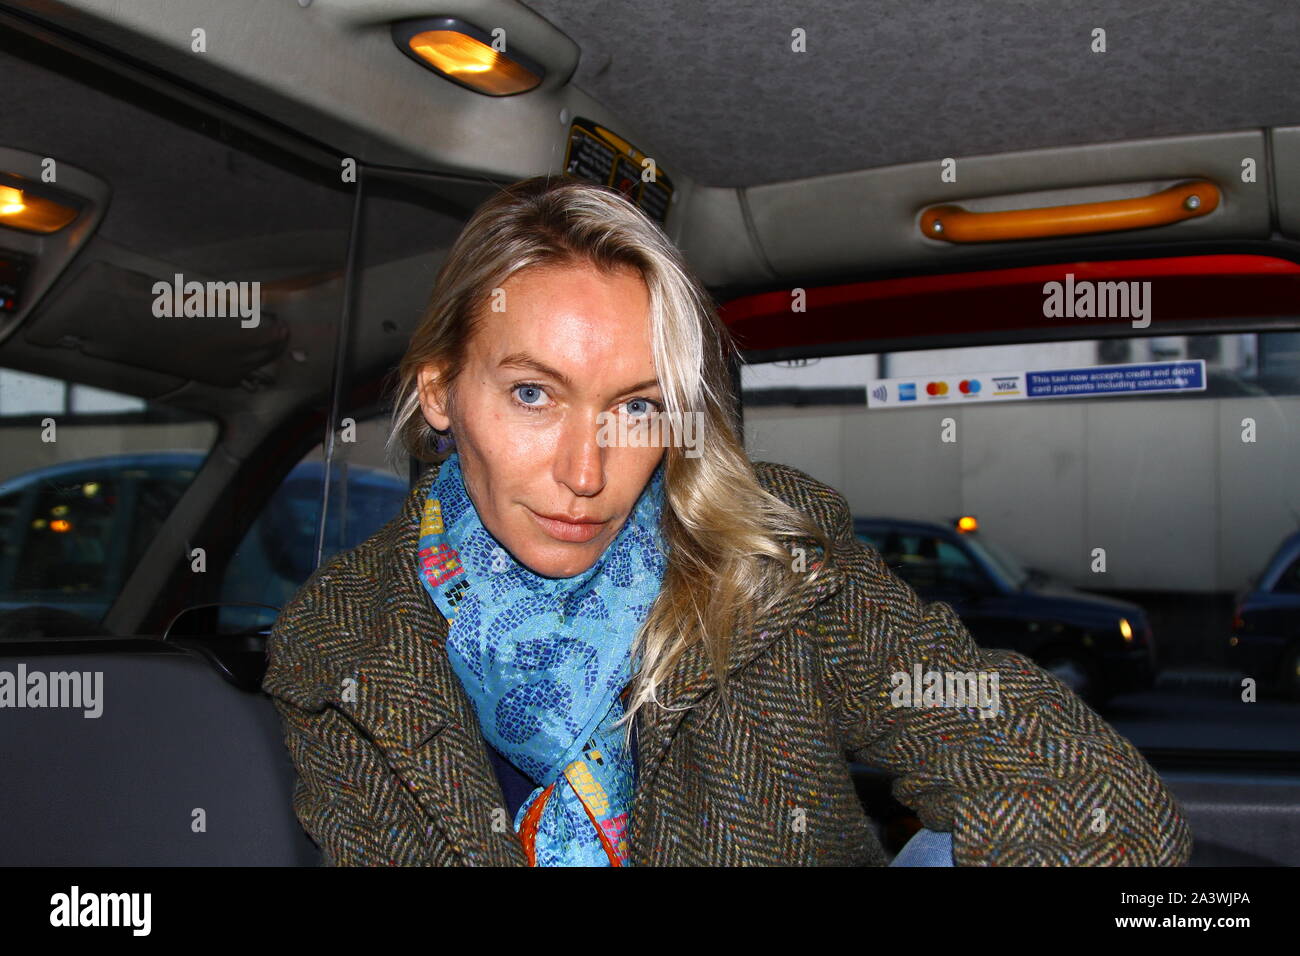 Lisa Hilton Author name L S Hilton pictured in the back of a London Taxi cab at Paddington station on 9th October 2019.Lisa Hilton is a British writer of history books and historical fiction. Lisa gave her consent for this photograph to be taken of her for the stock photo image site alamy.com Stock Photo